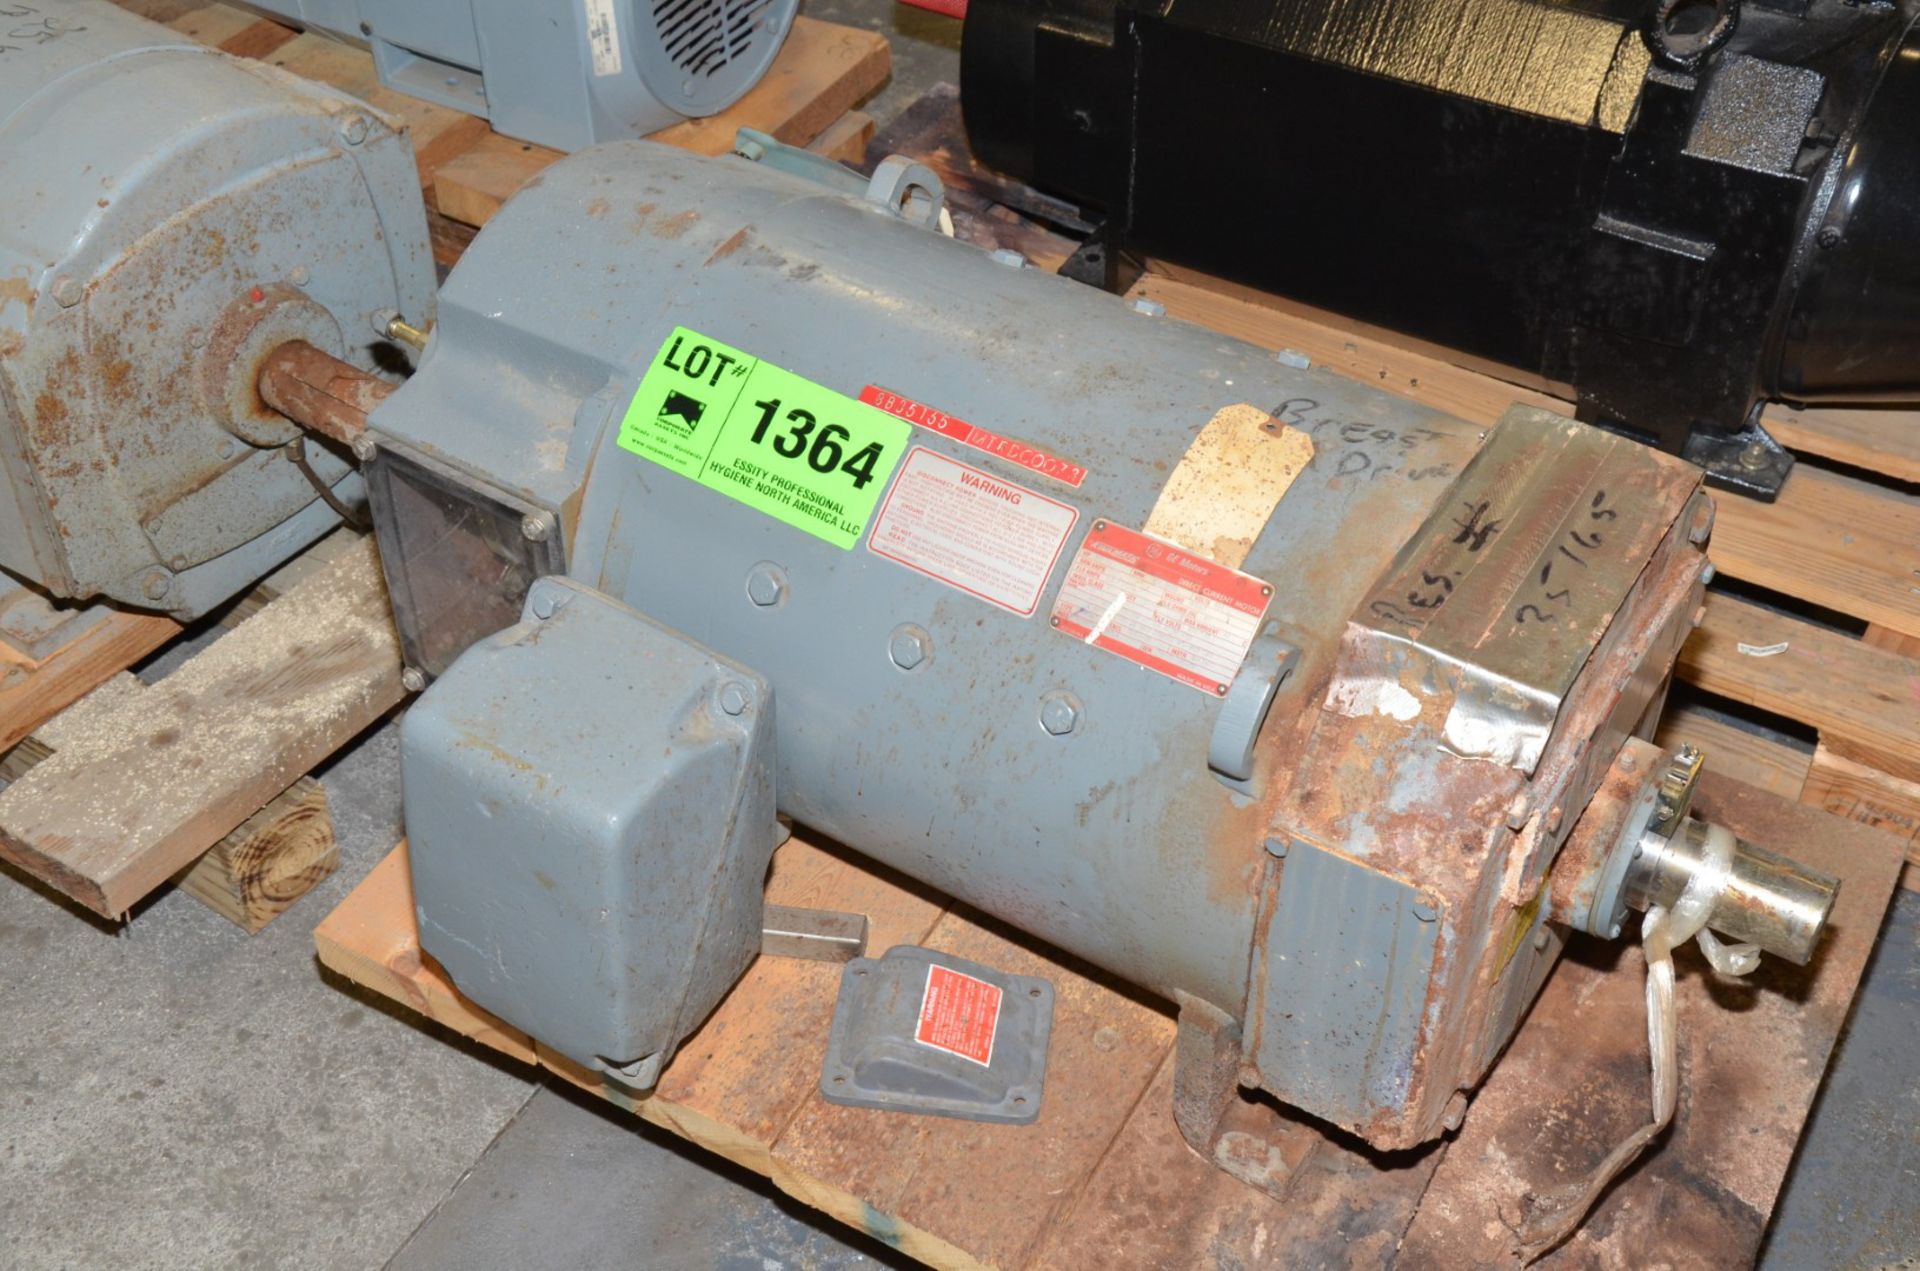 GE 75 HP 2100 RPM 460V ELECTRIC MOTOR [RIGGING FEE FOR LOT #1364 - $25 USD PLUS APPLICABLE TAXES] - Image 2 of 3